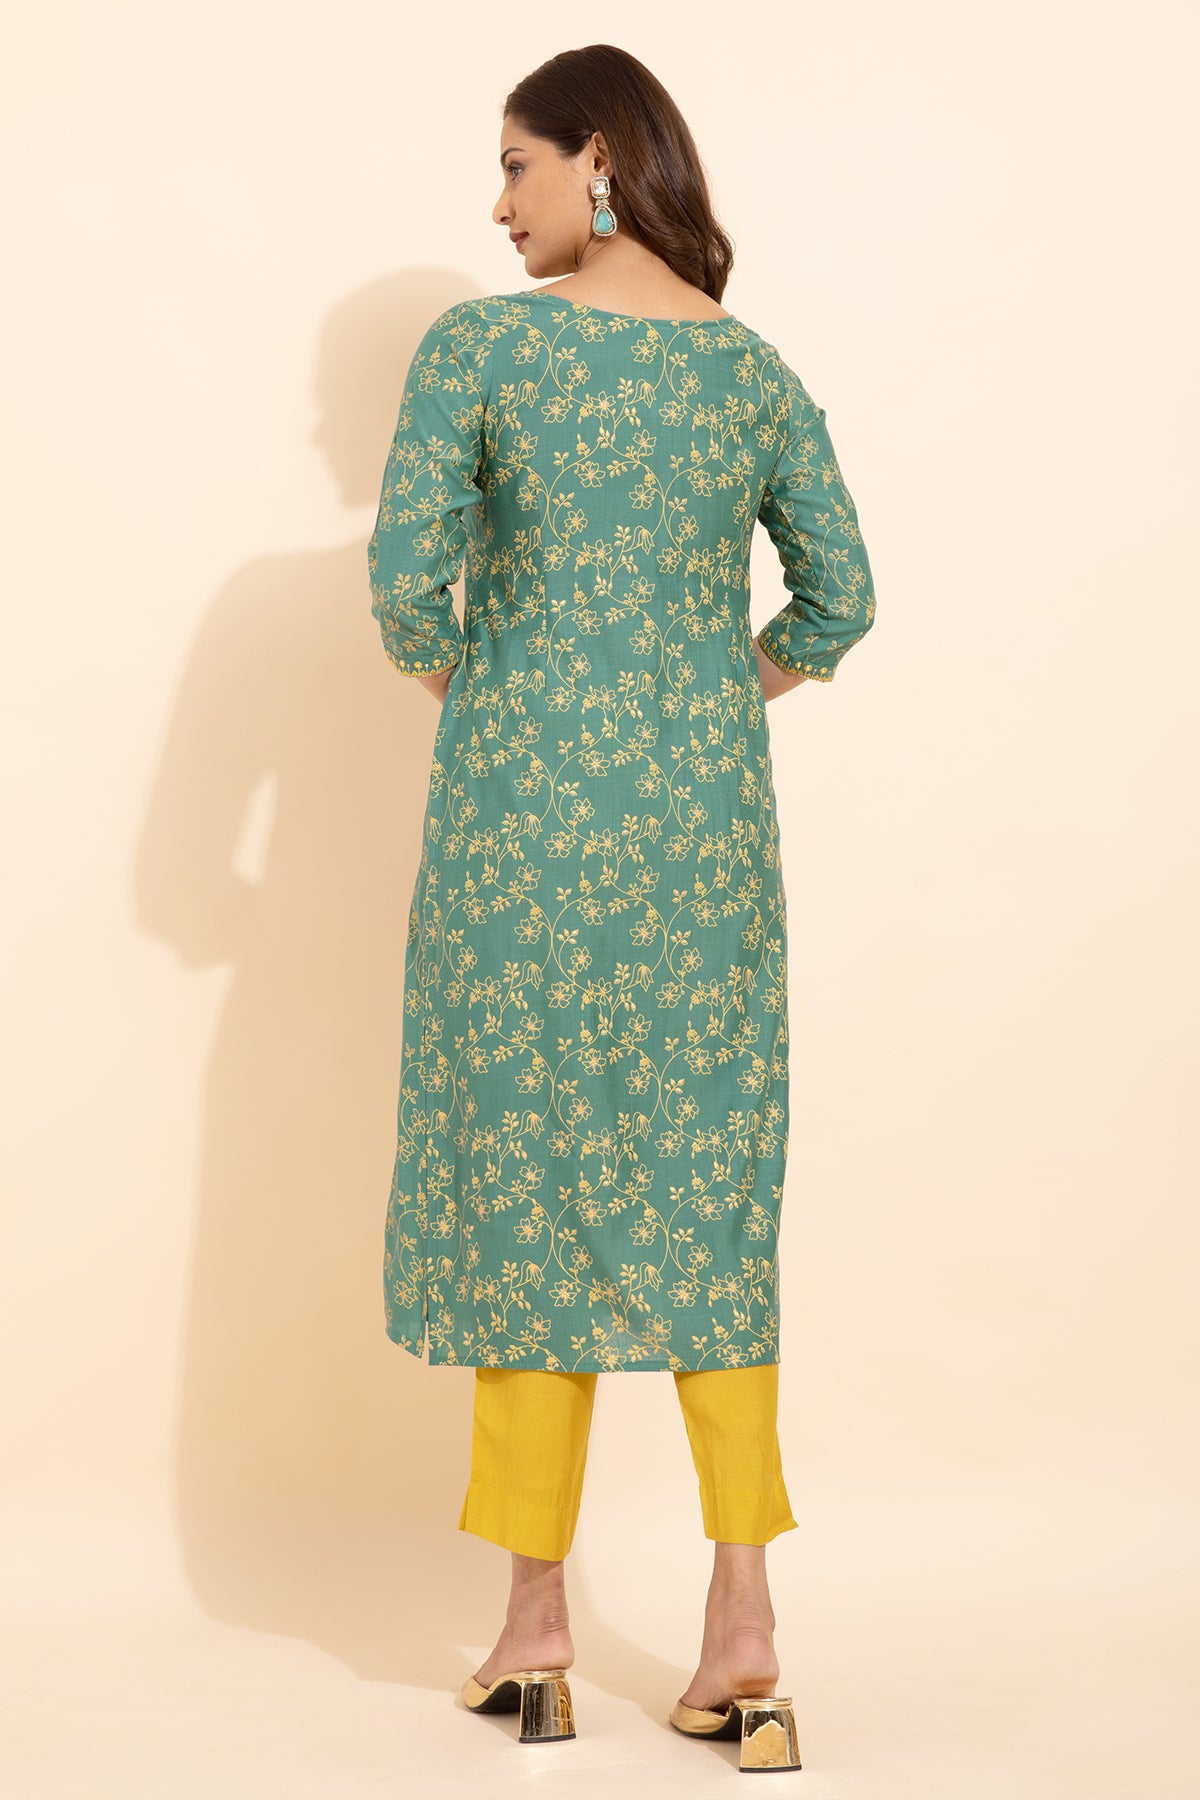 Jewel Embroidered Neckline Floral Printed Kurta Set With Sequin Dupatta Green Yellow